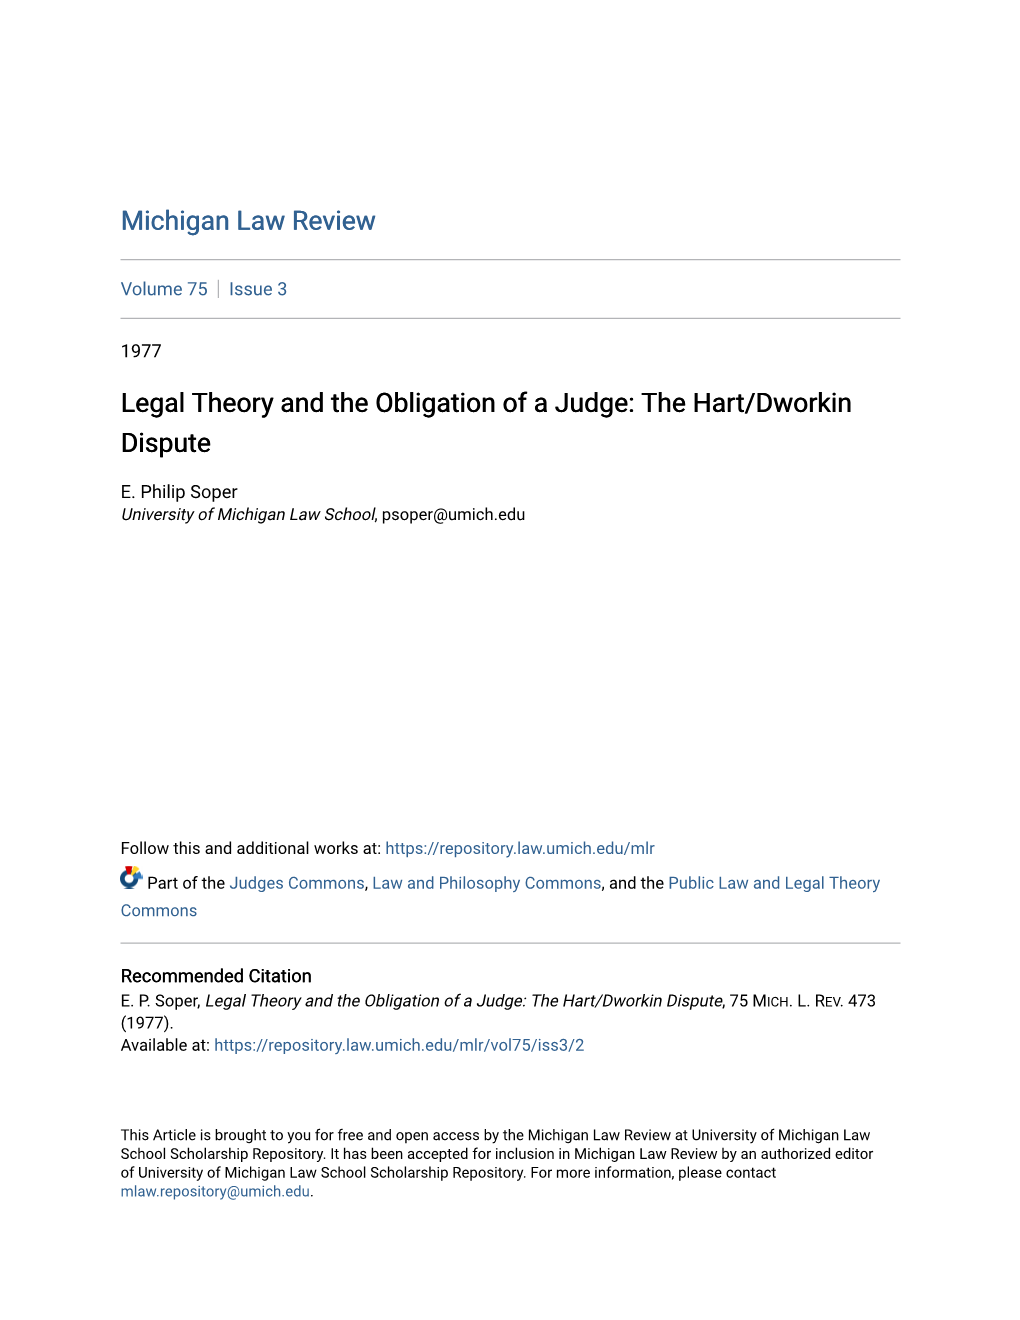 Legal Theory and the Obligation of a Judge: the Hart/Dworkin Dispute